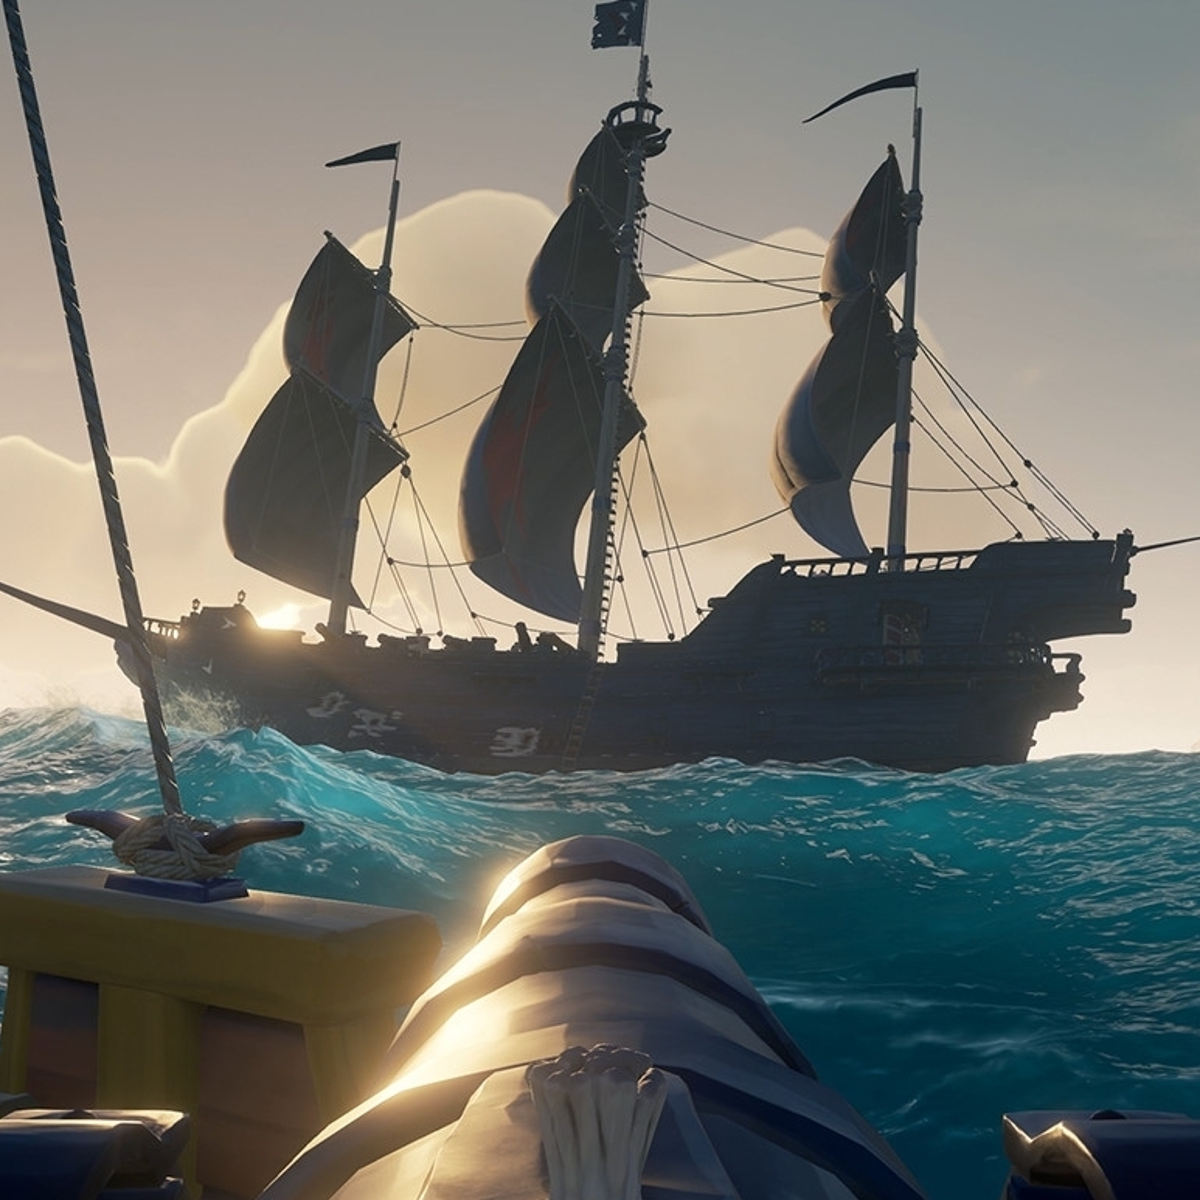 Last Pirate cheats, tips - How to fight and survive